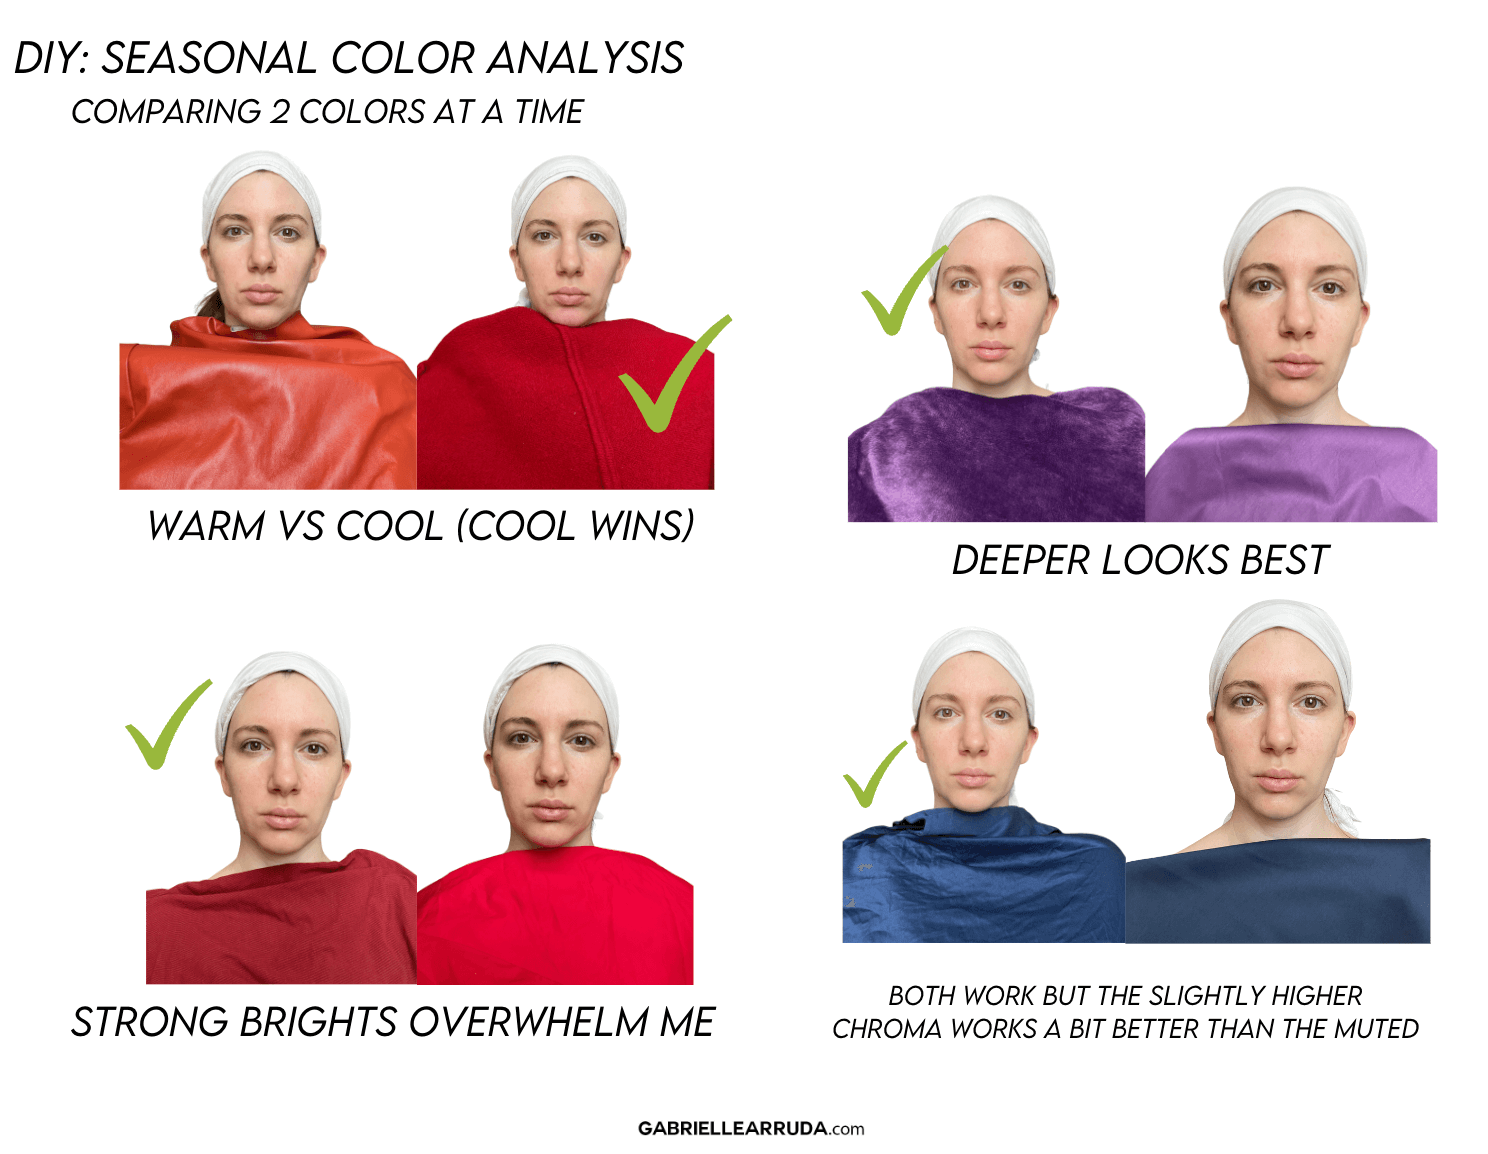 examing 2 colors at a time to determine your dominant color qualities